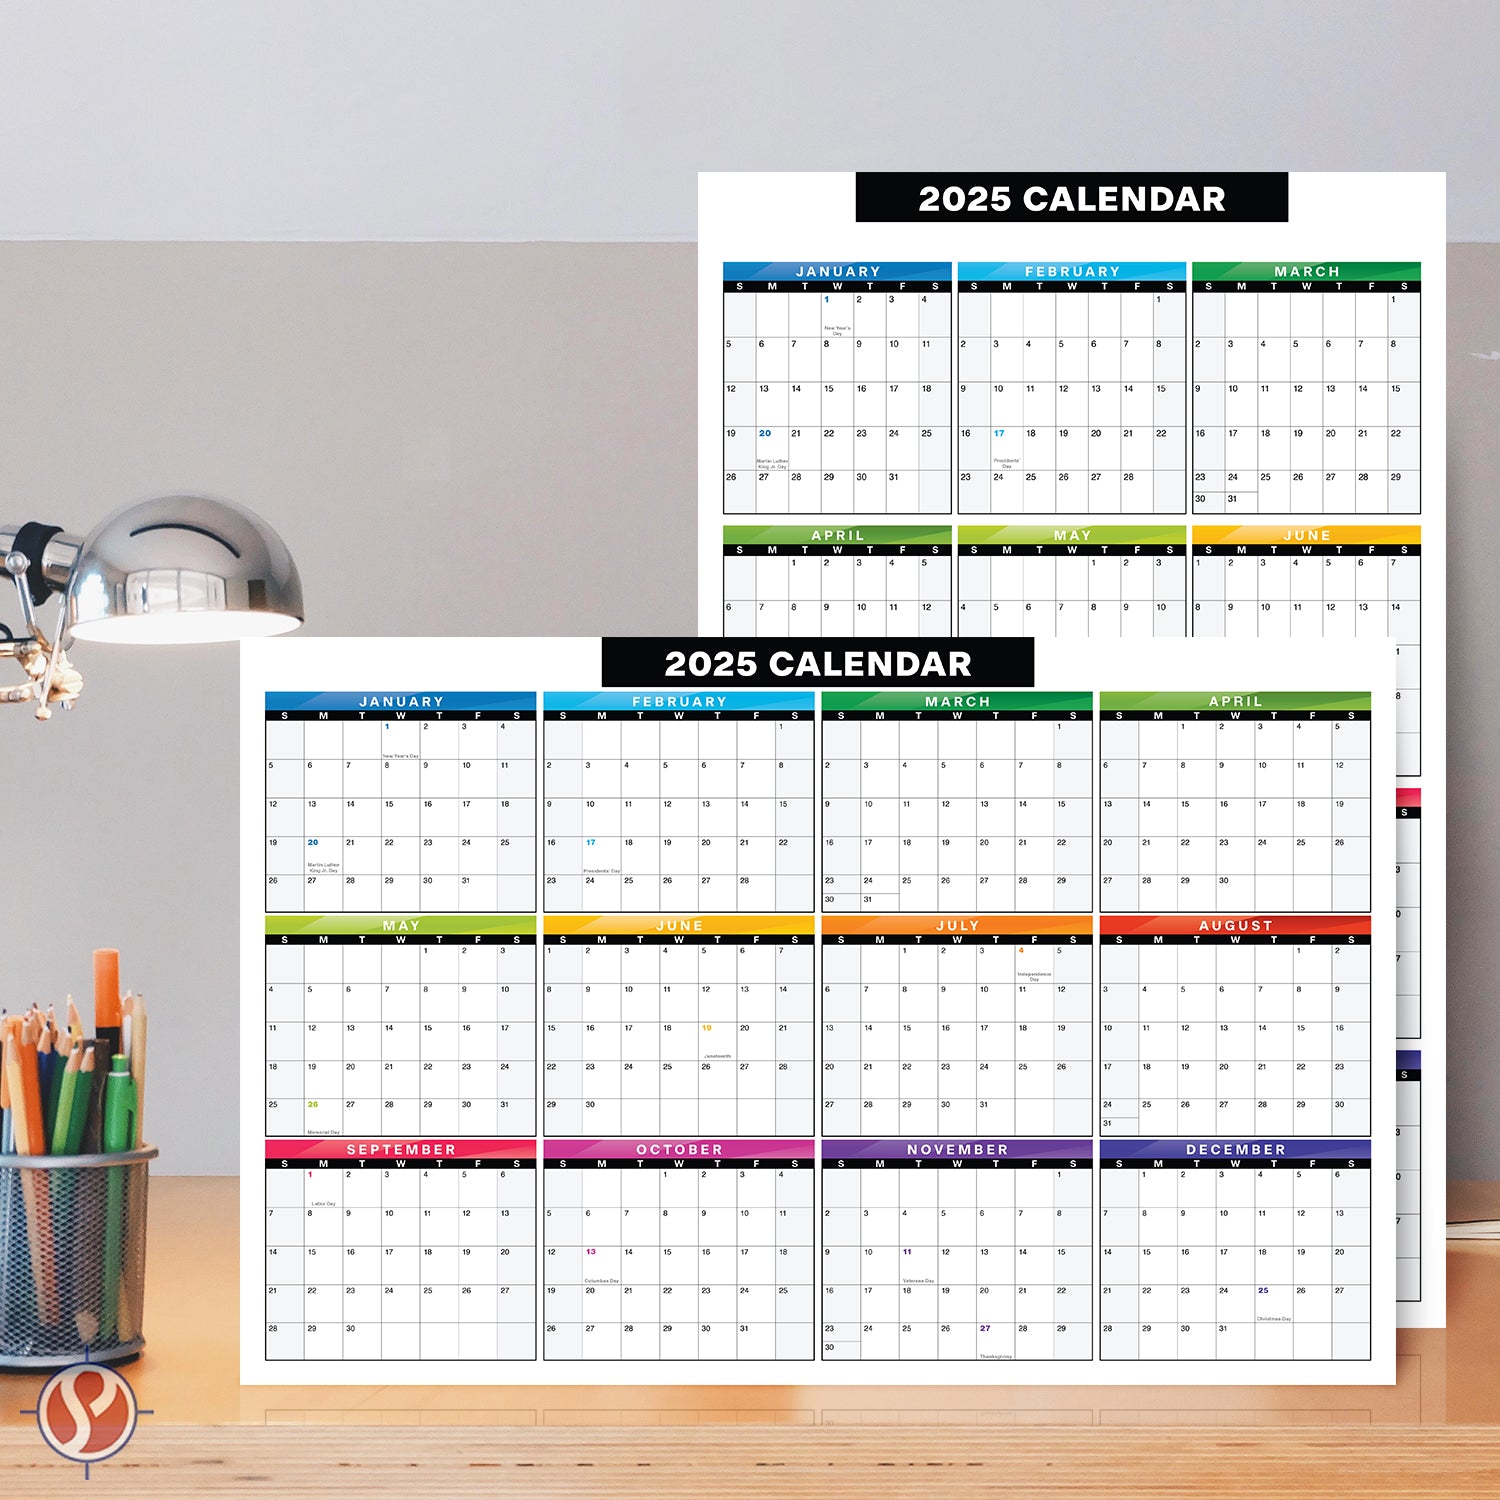 2025 Full Desk Calendar - 11 x 17” Large Size 2 Sided Vertical/Horizontal Reversible - Printed on Thick and Durable 80lb Cardstock (216 GSM) 2 per pck